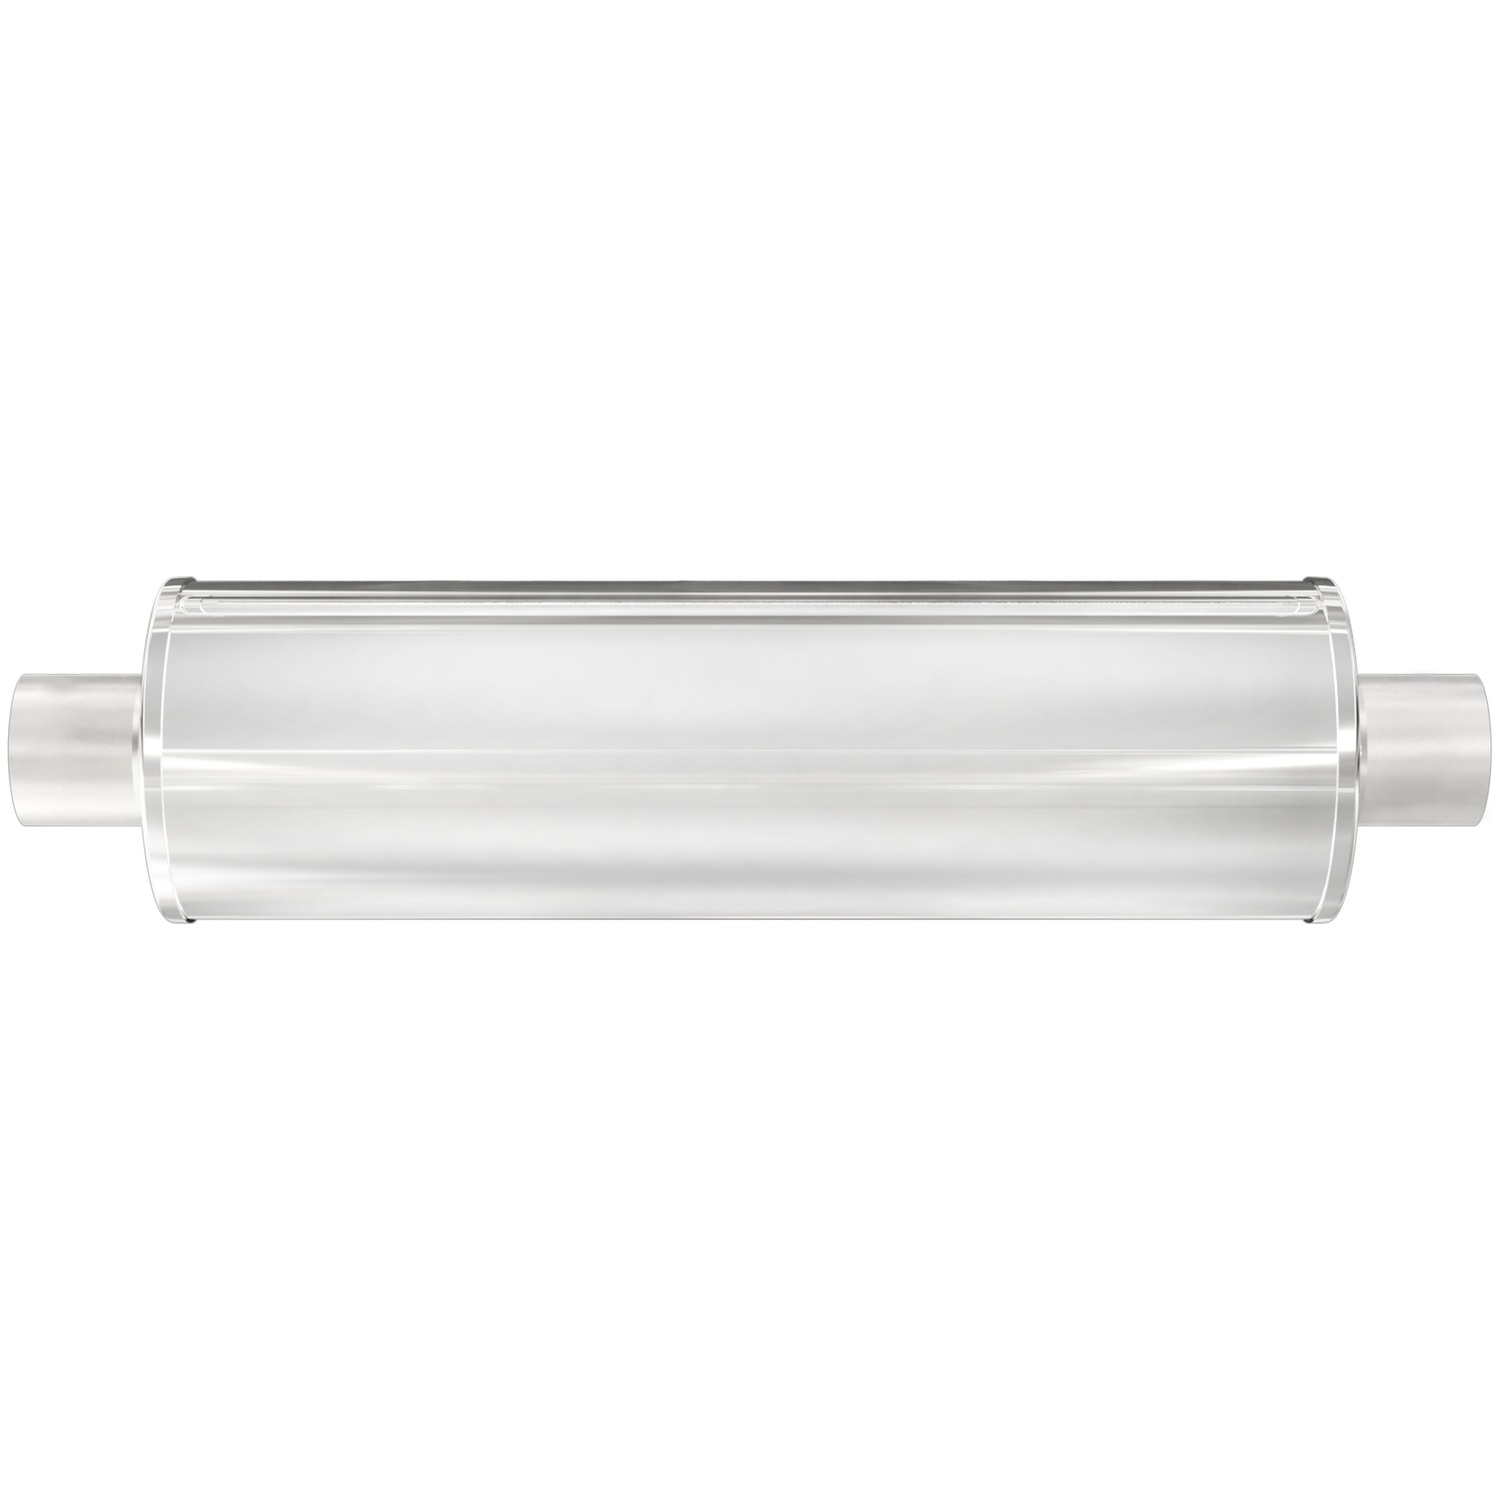 7" Round XL 3-Chamber Muffler Center In/Center Out: 3"/3" Body Length: 34" Overall Length: 40" Satin Finish